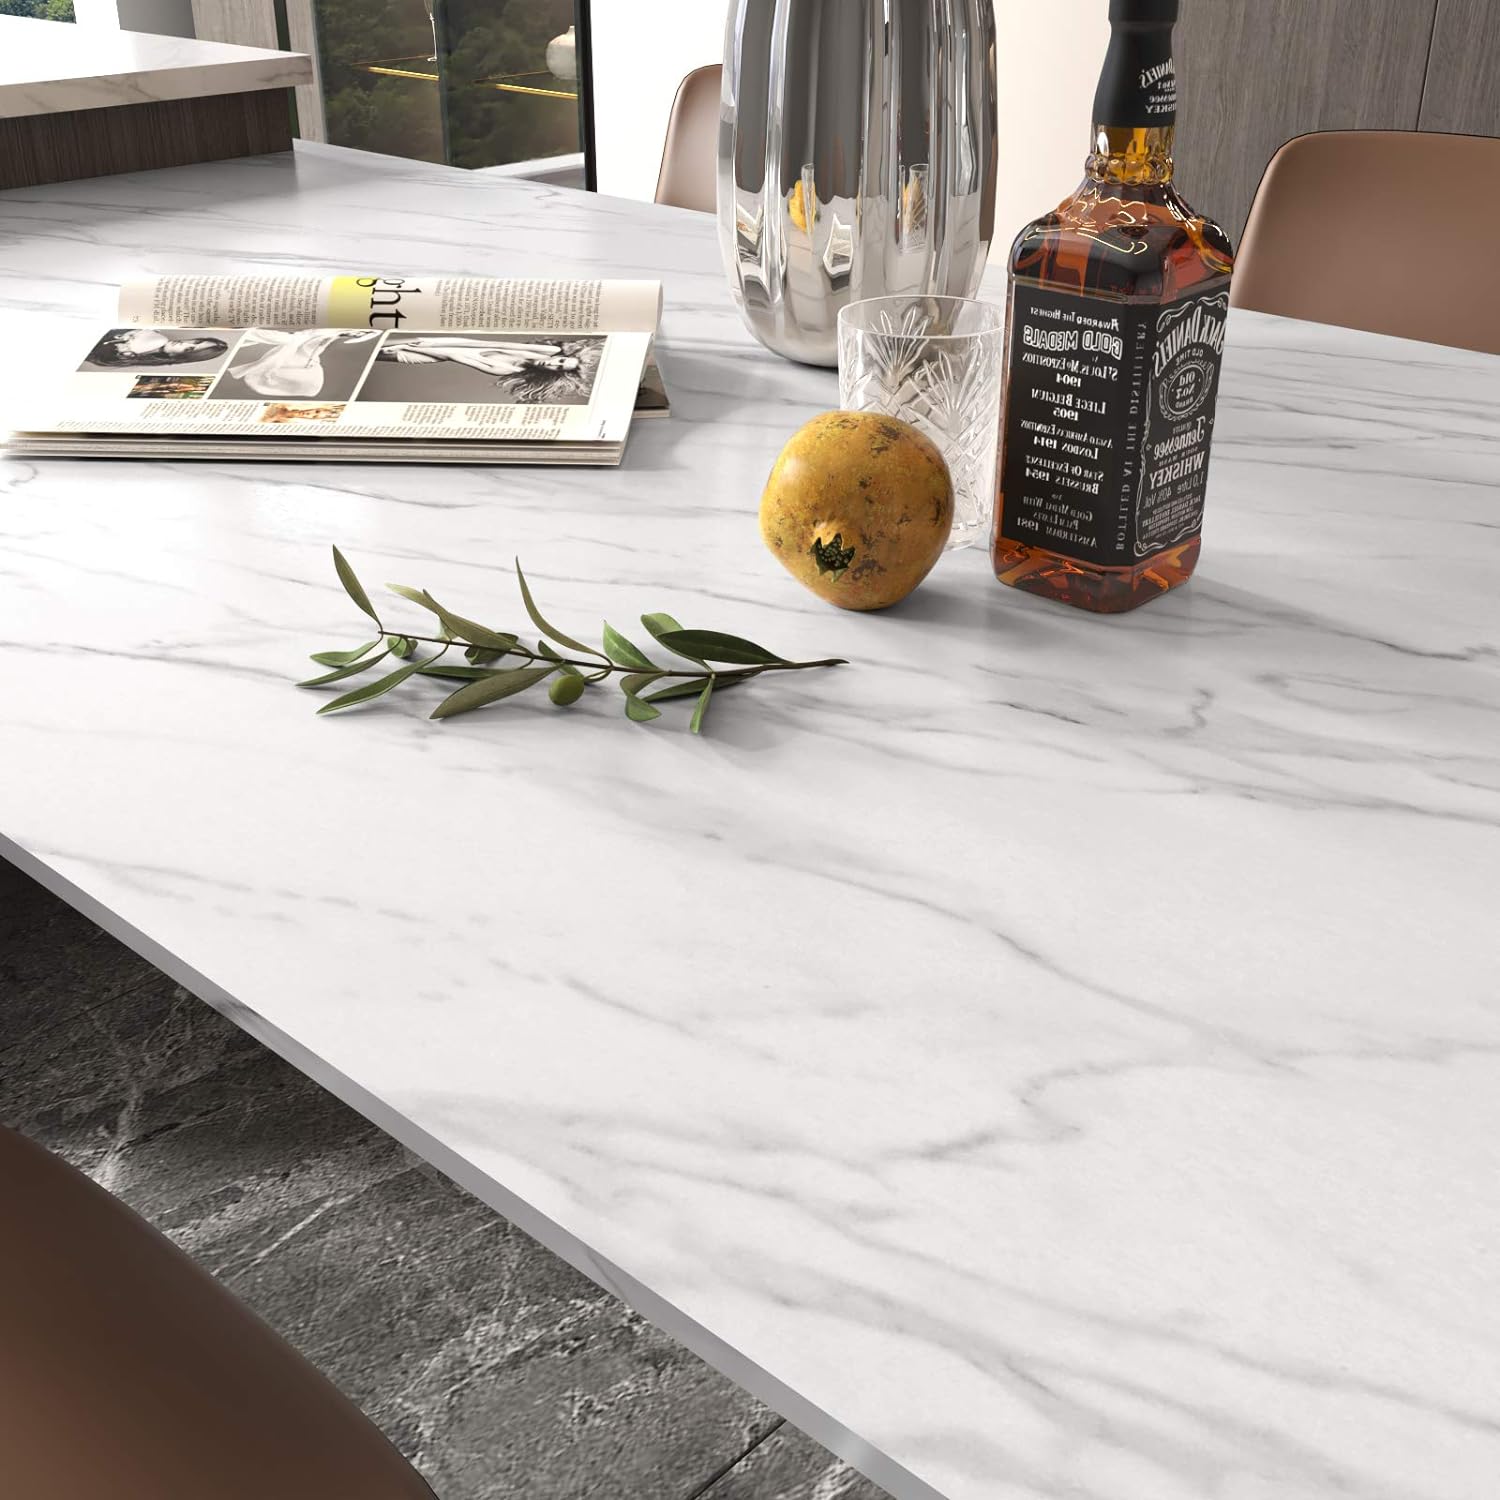 Stickyart 36x160 Marble Peel and Stick Countertop Contact Paper Waterproof Off White Grey Granite Look Contact Paper Removable Self Adhesive Vinyl Marble Wallpaper Decorative Kitchen Backsplash